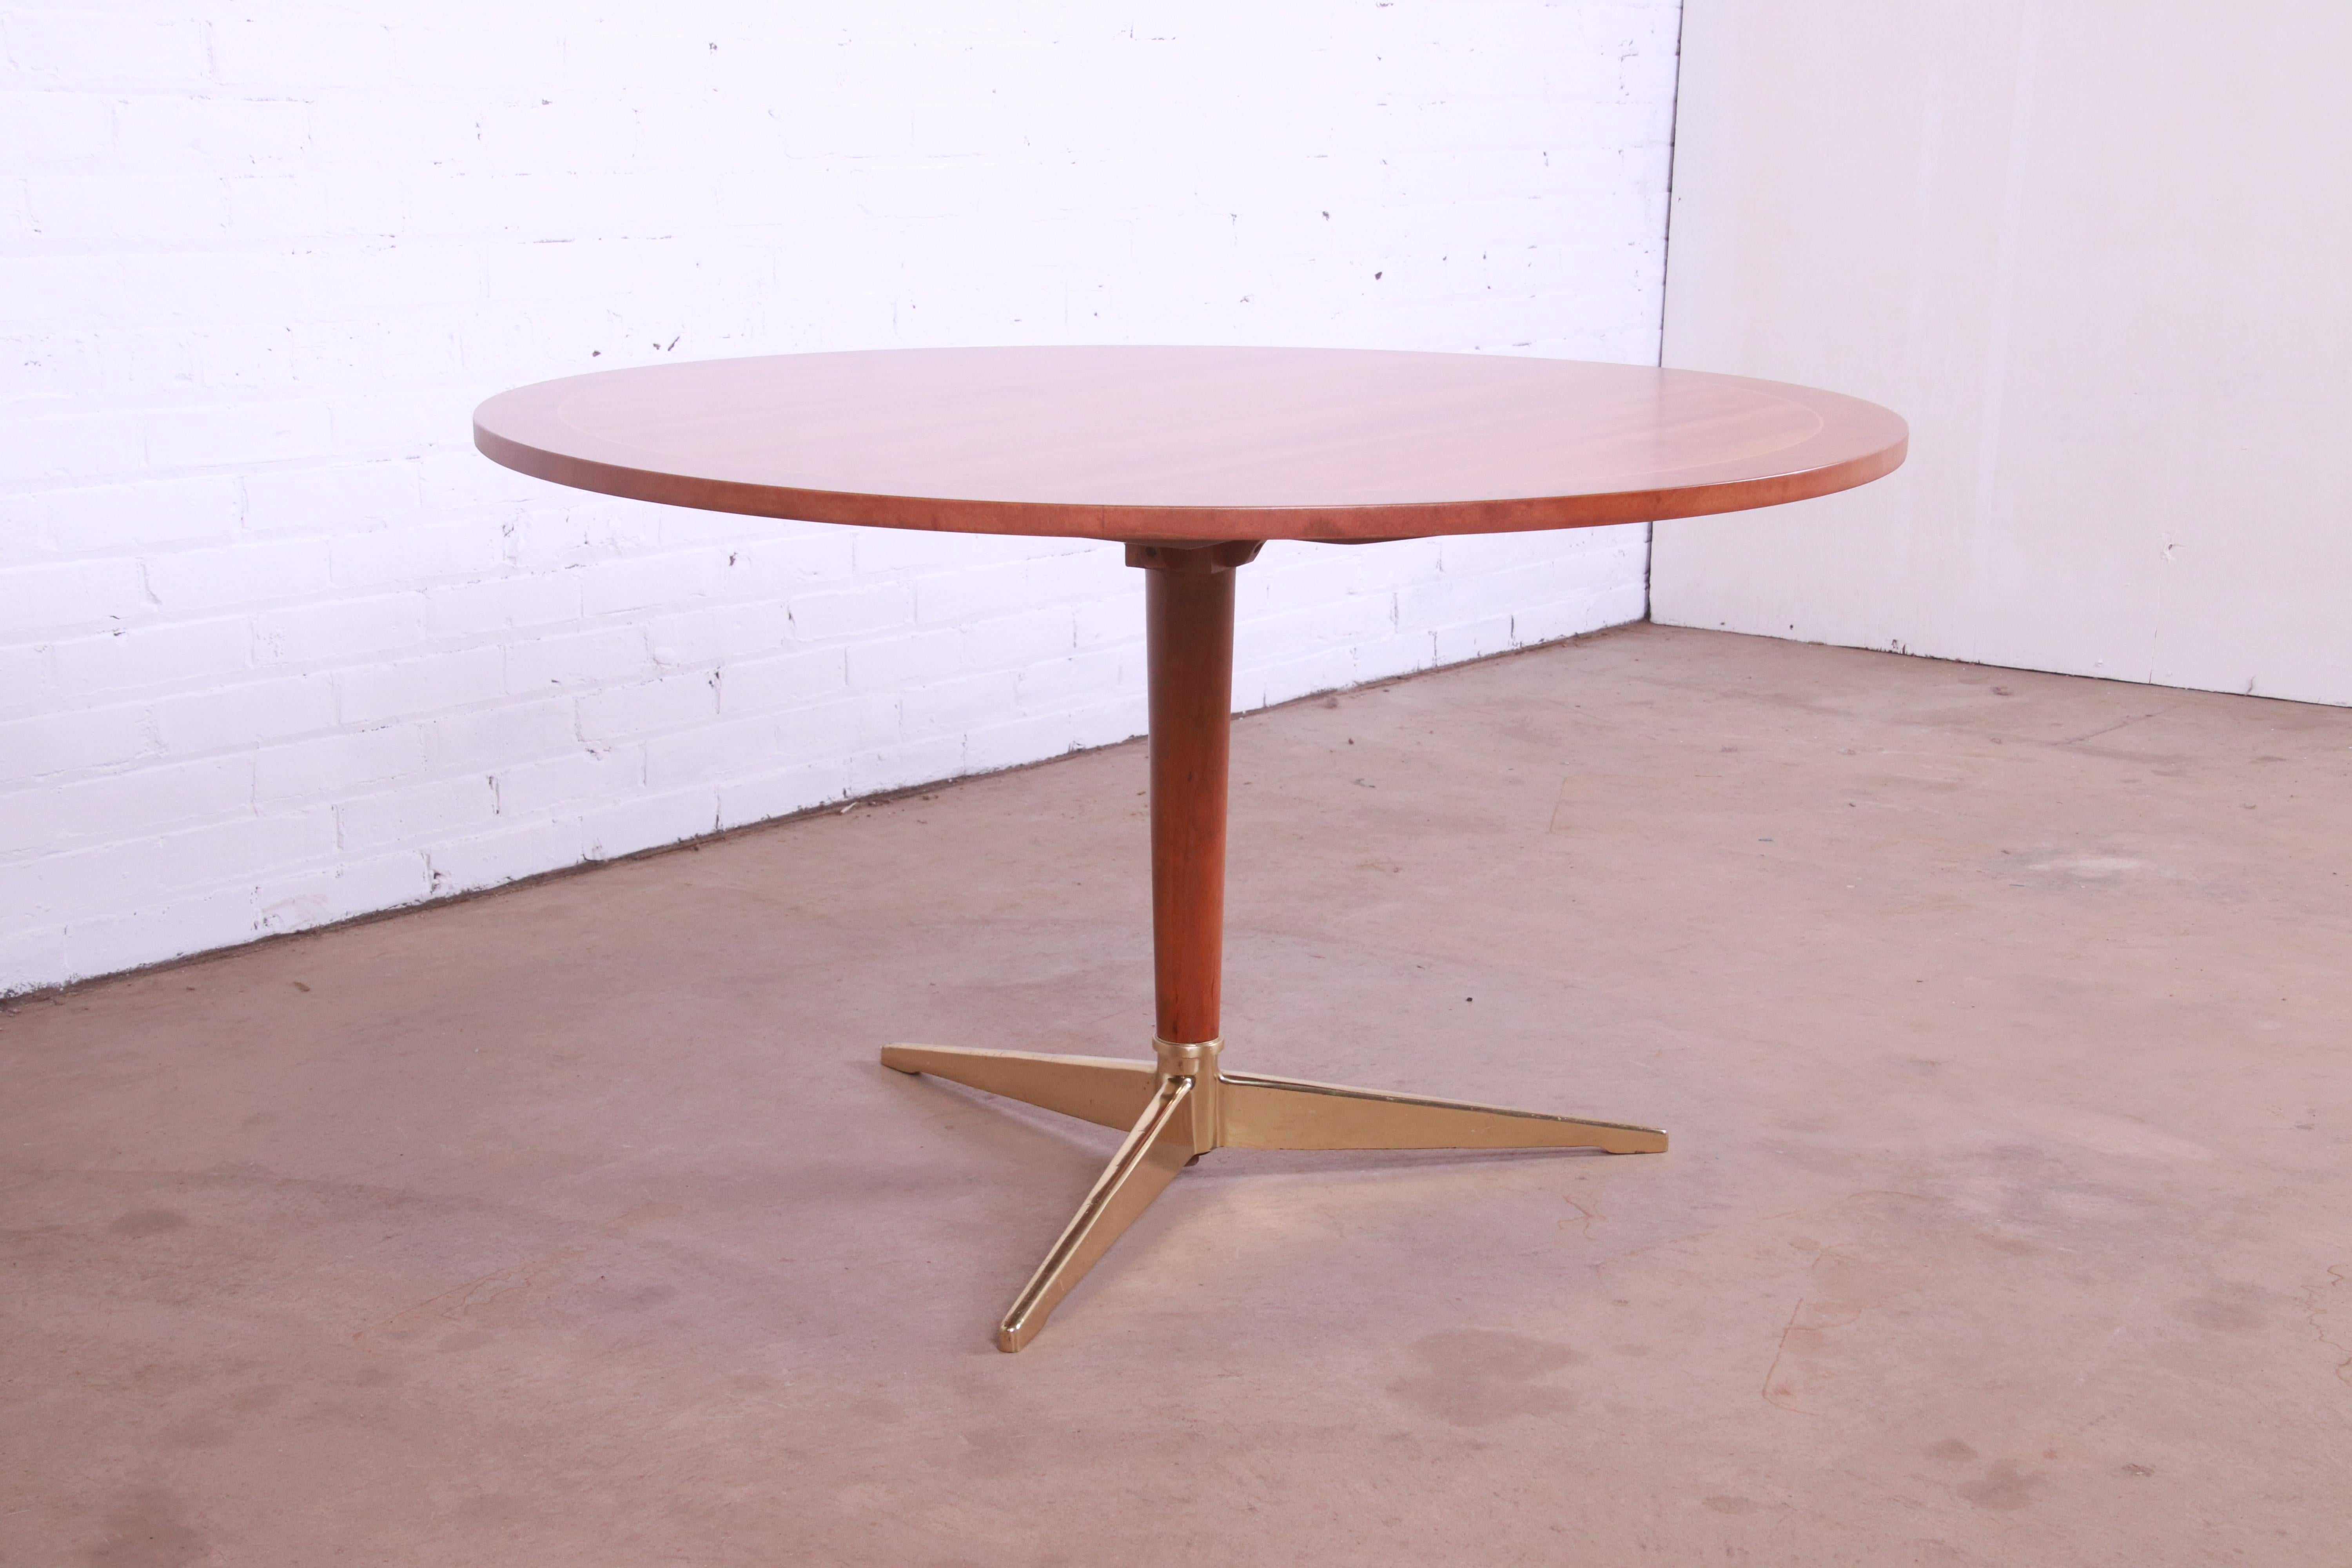 20th Century Baker Furniture Rotating Café Table in Cherry, Burl, and Brass, Newly Refinished